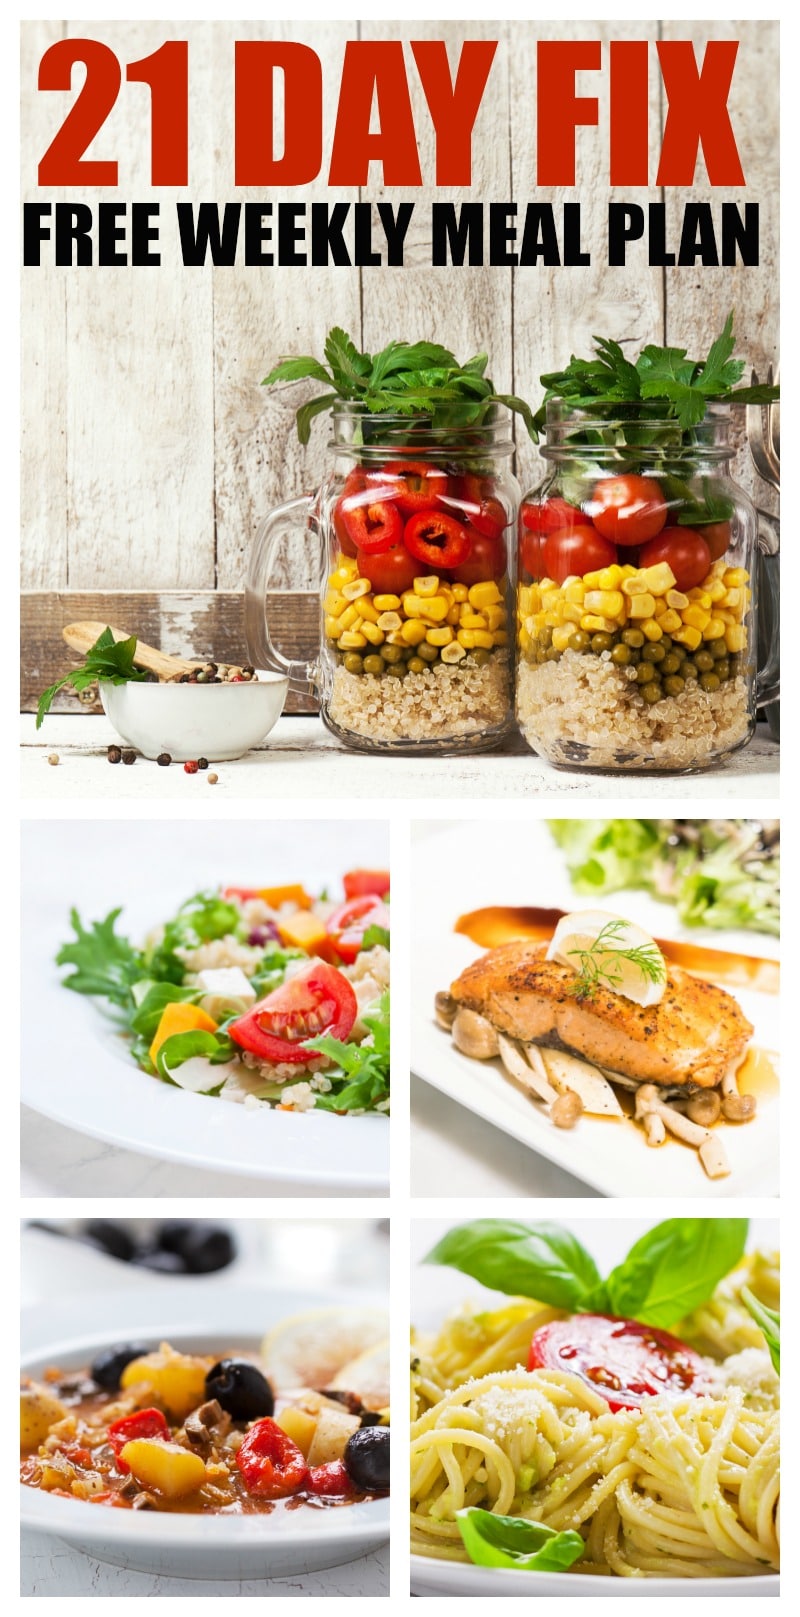 21-Day Fix Meal Plan [Infographic]